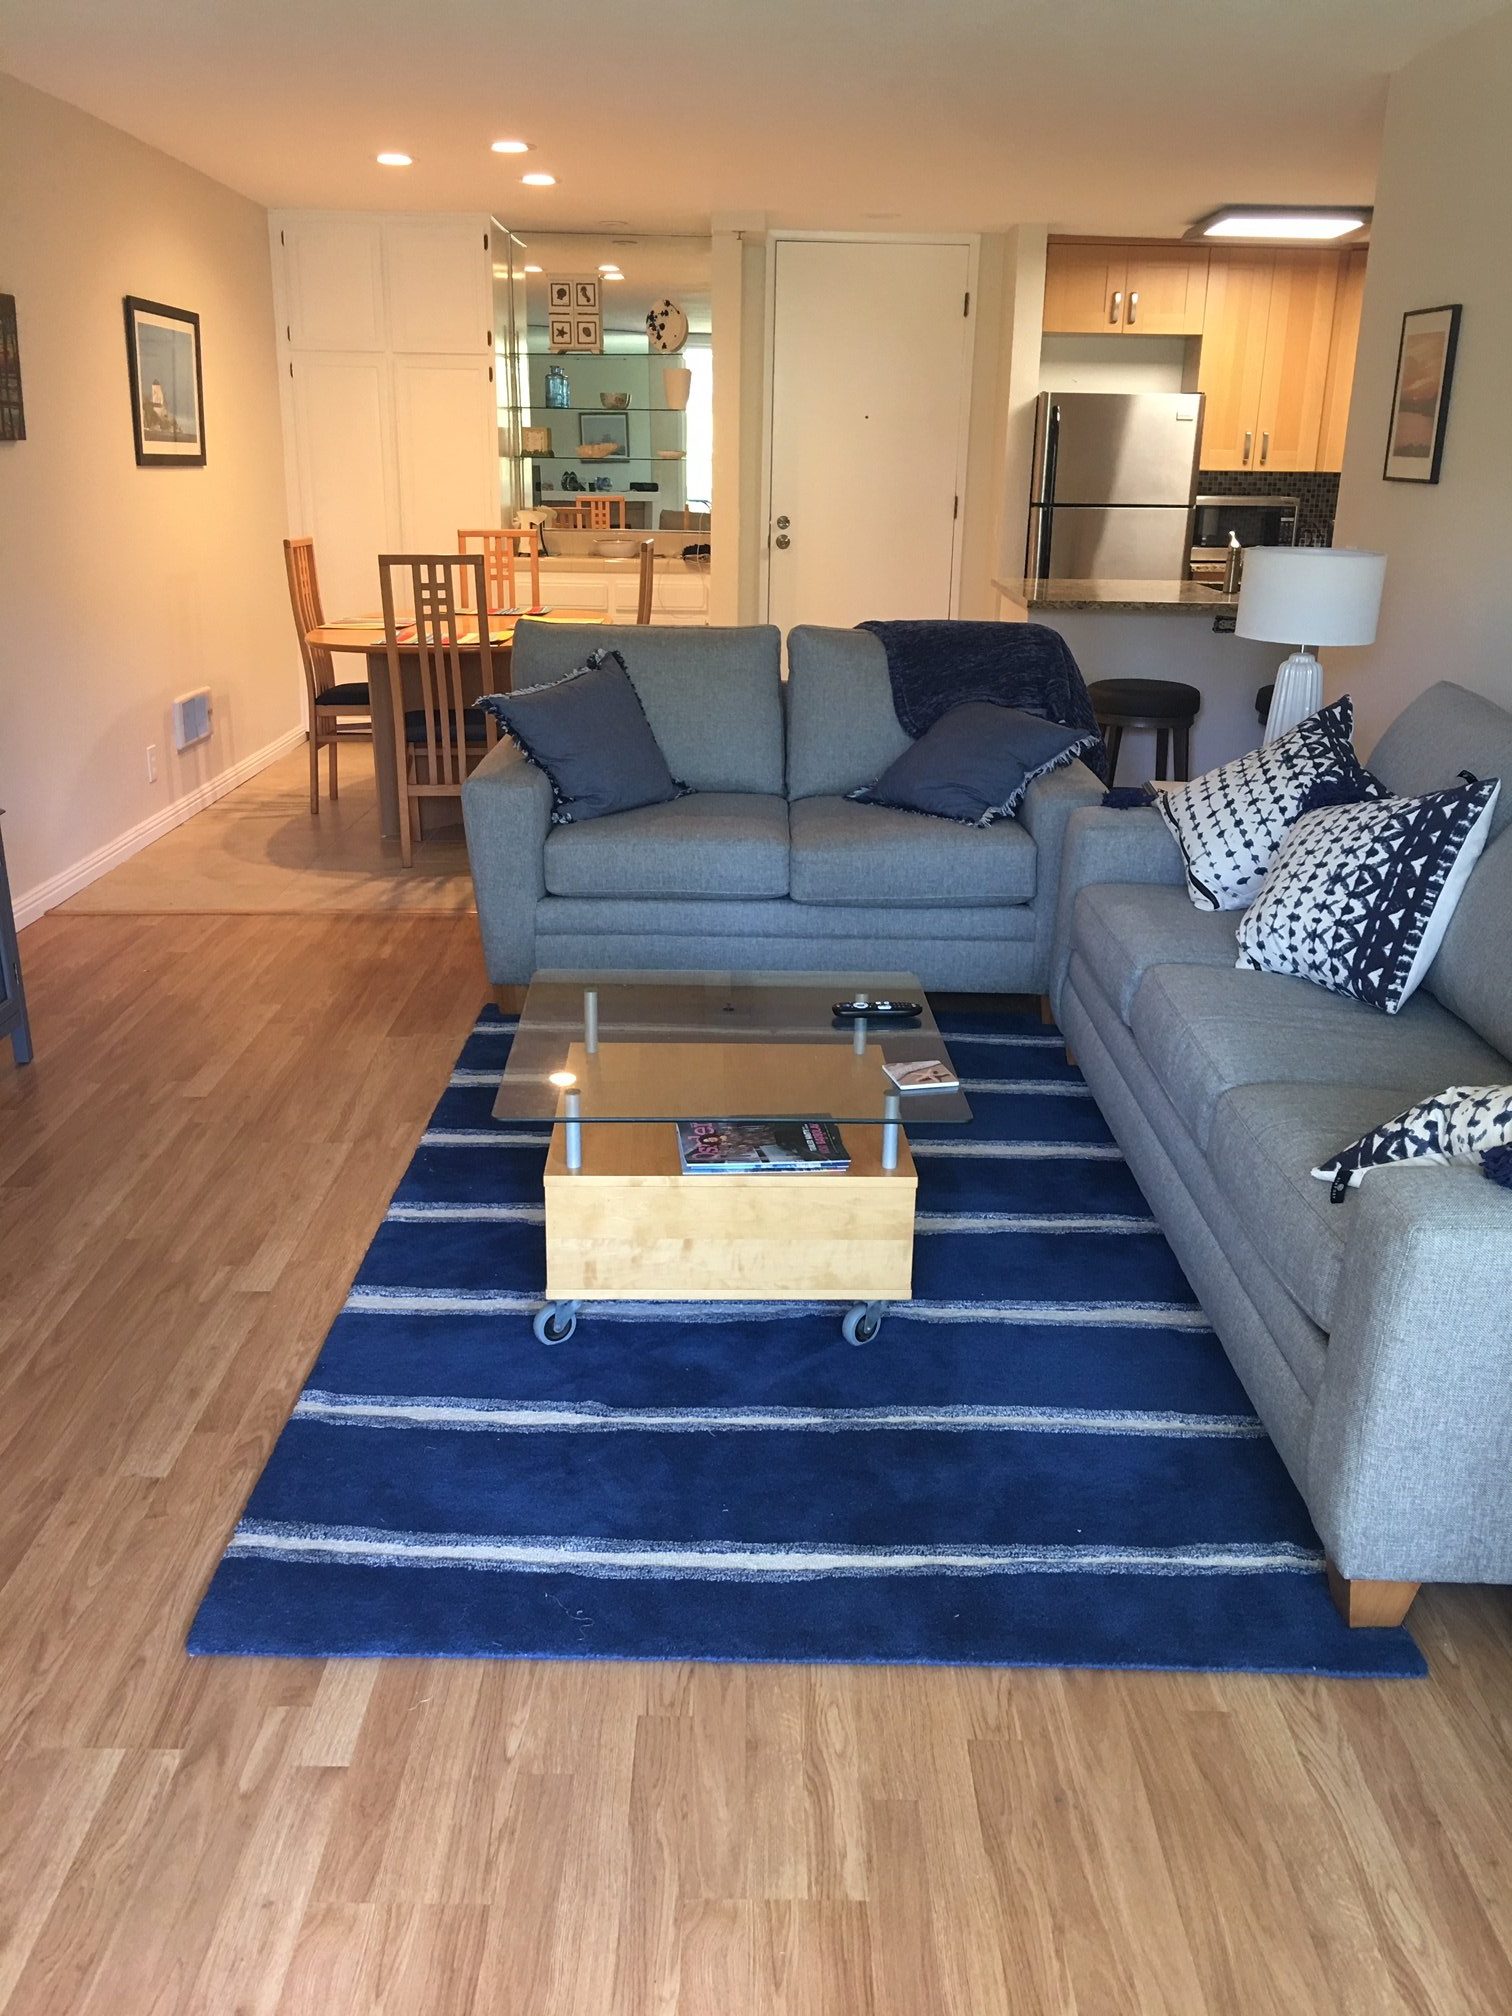 Unit F-106 blue area rug and grey sleeper sofa and love seat